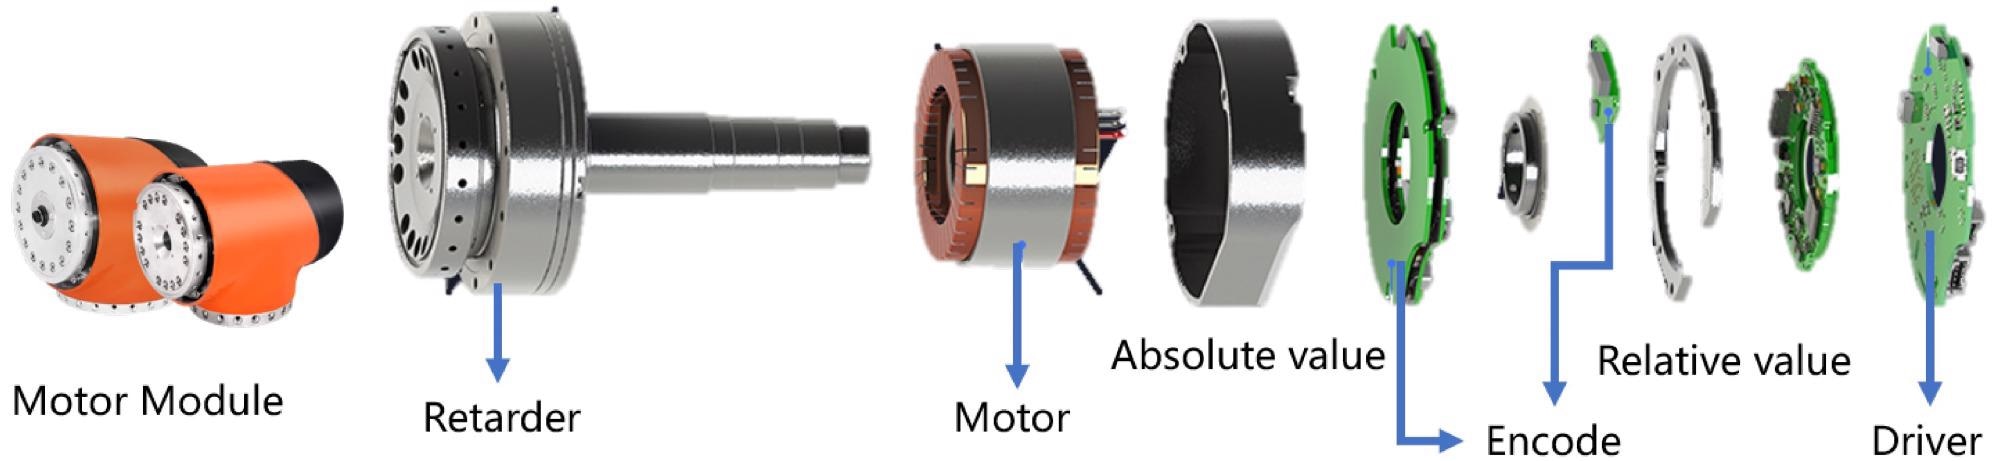 Composition of motor module.